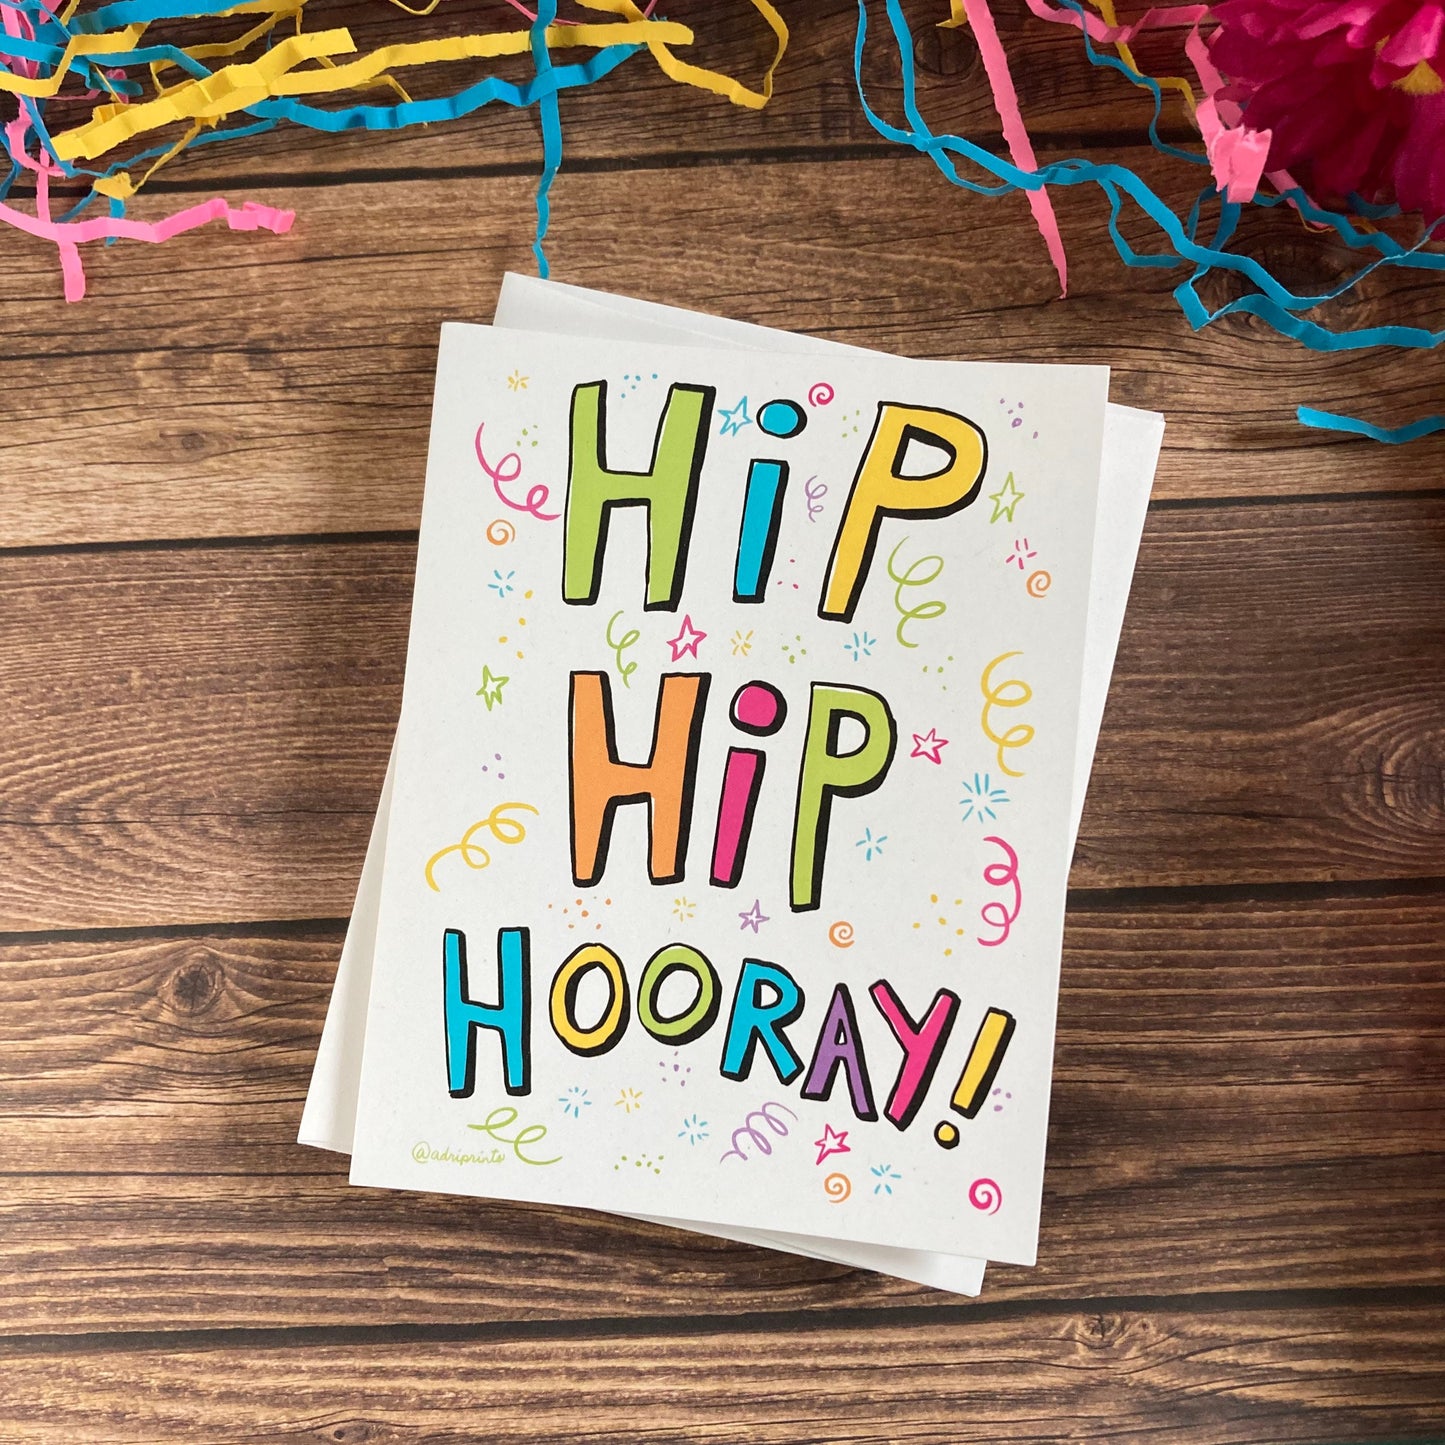 EVERYDAY - Hip Hip Hooray! - Happy Graduation, Celebrate, Accomplishment Card featuring Lettering by Adriana Bergstrom